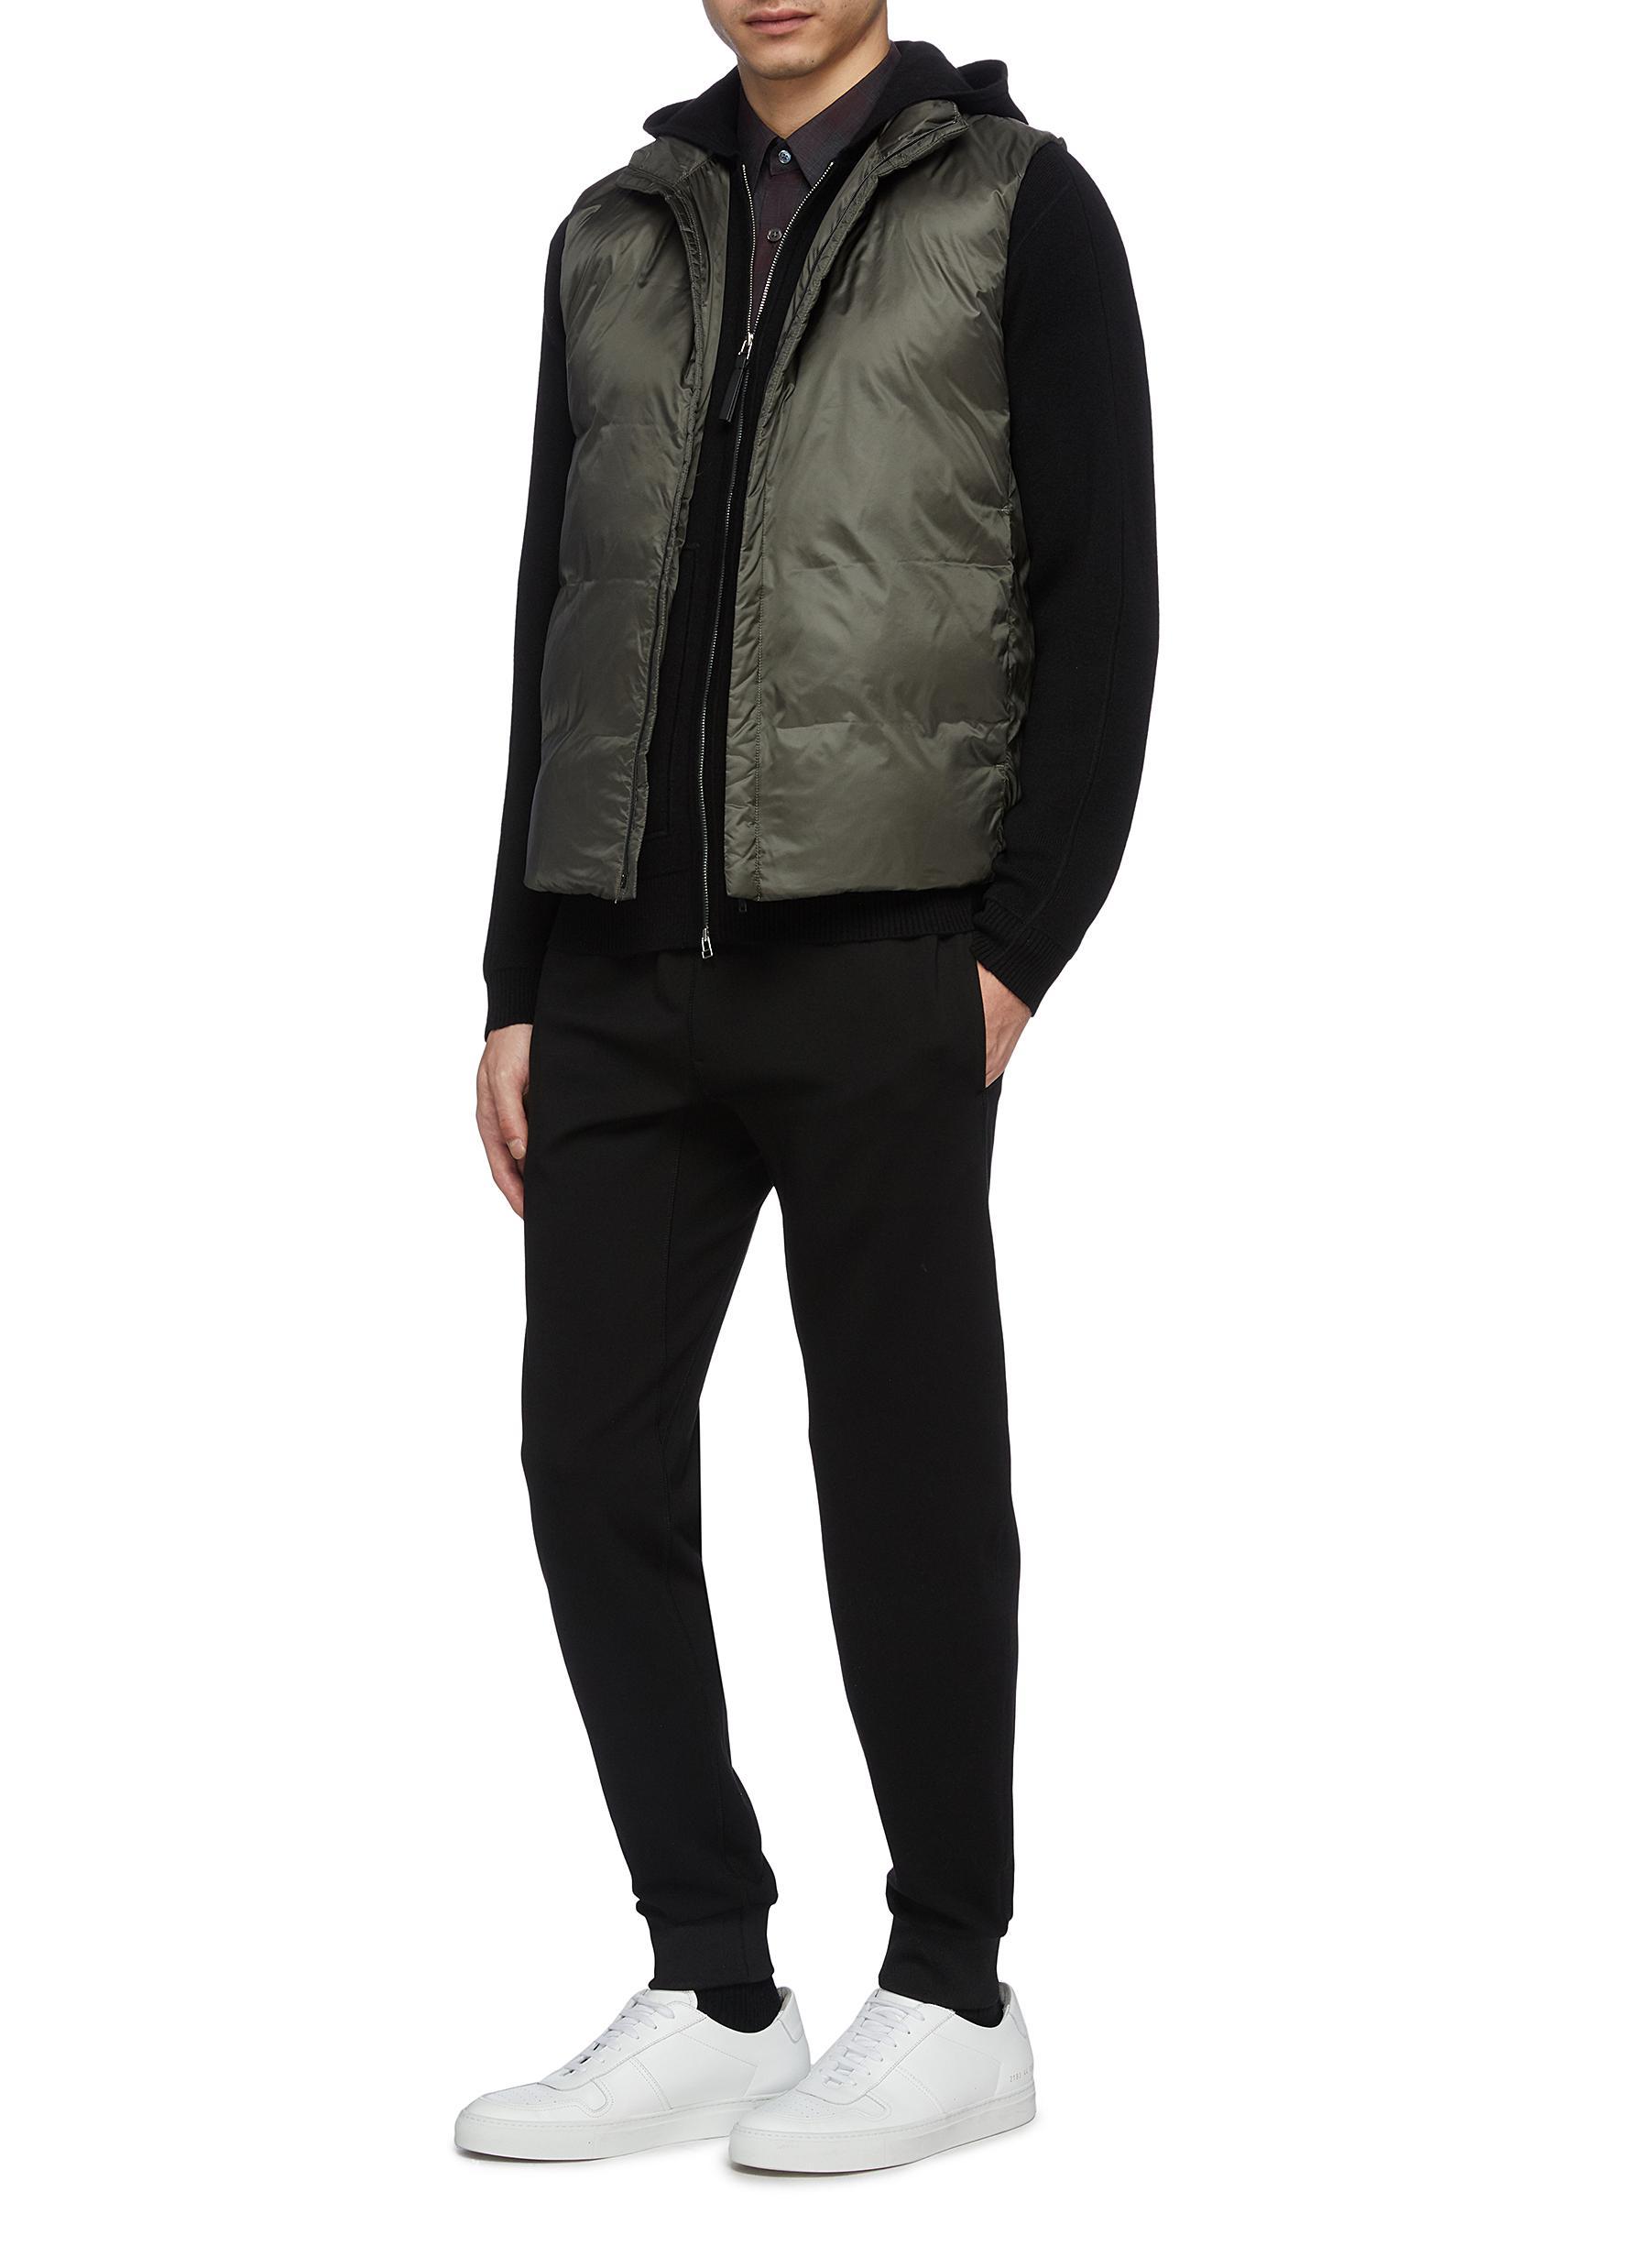 Theory Long Puffer Vest | vlr.eng.br